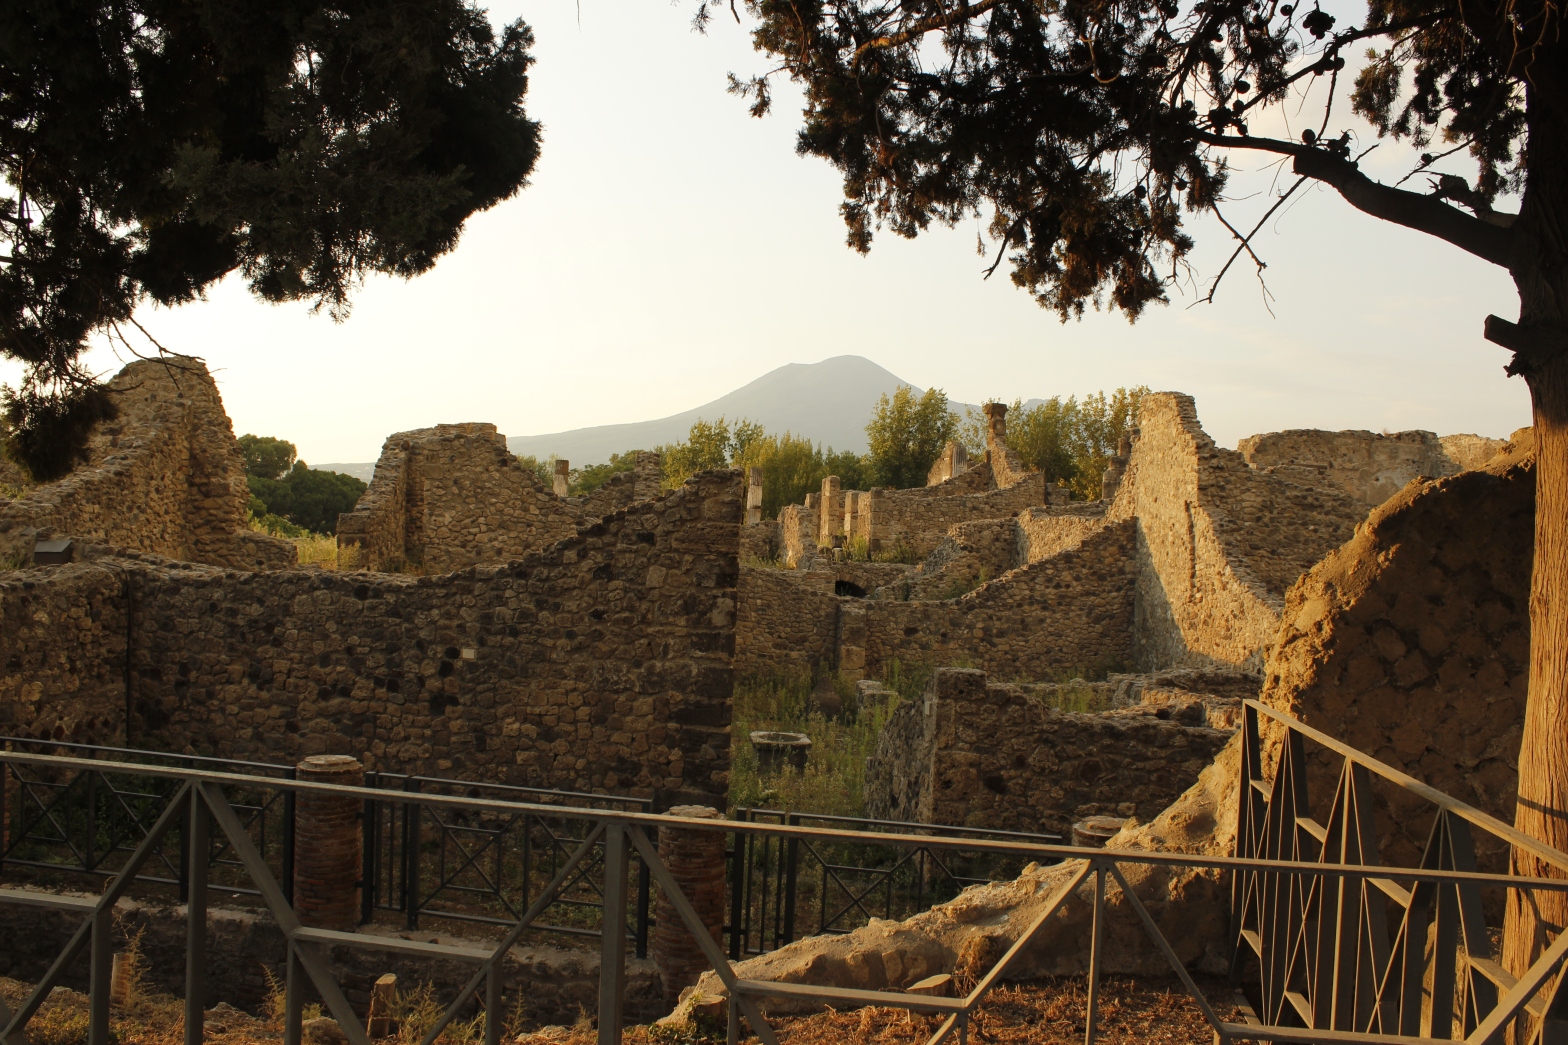 Italy Travel Tip | Plan for Pompeii | The ancient ruins of Pompeii